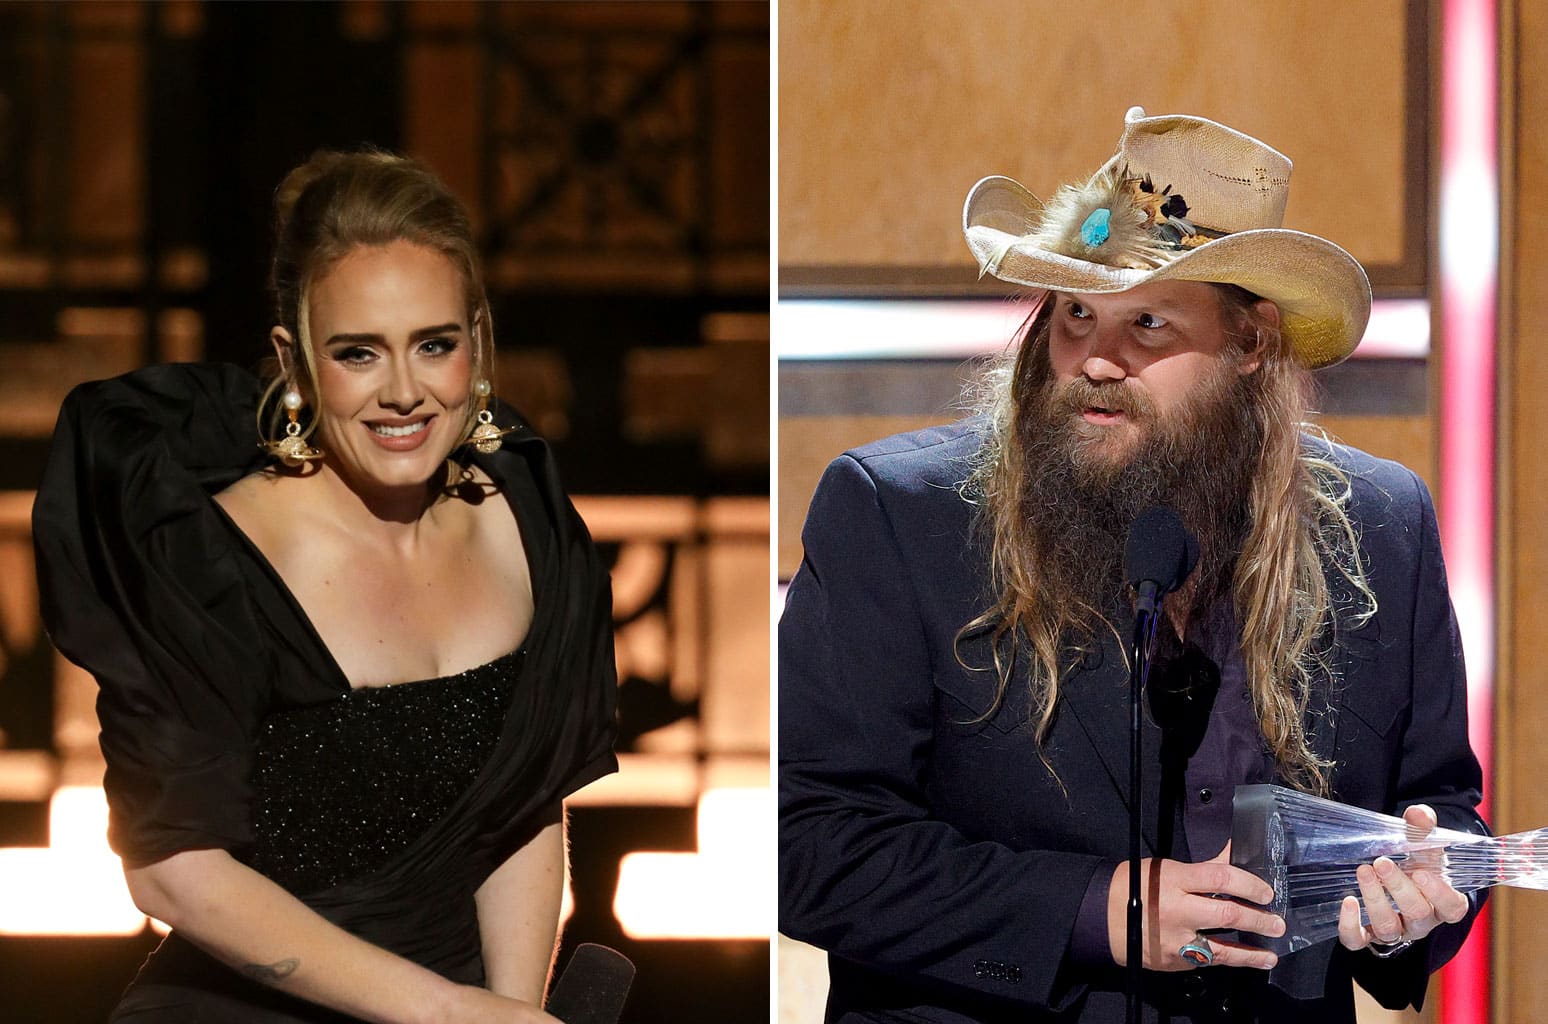 What did Adele say about Chris Stapleton?